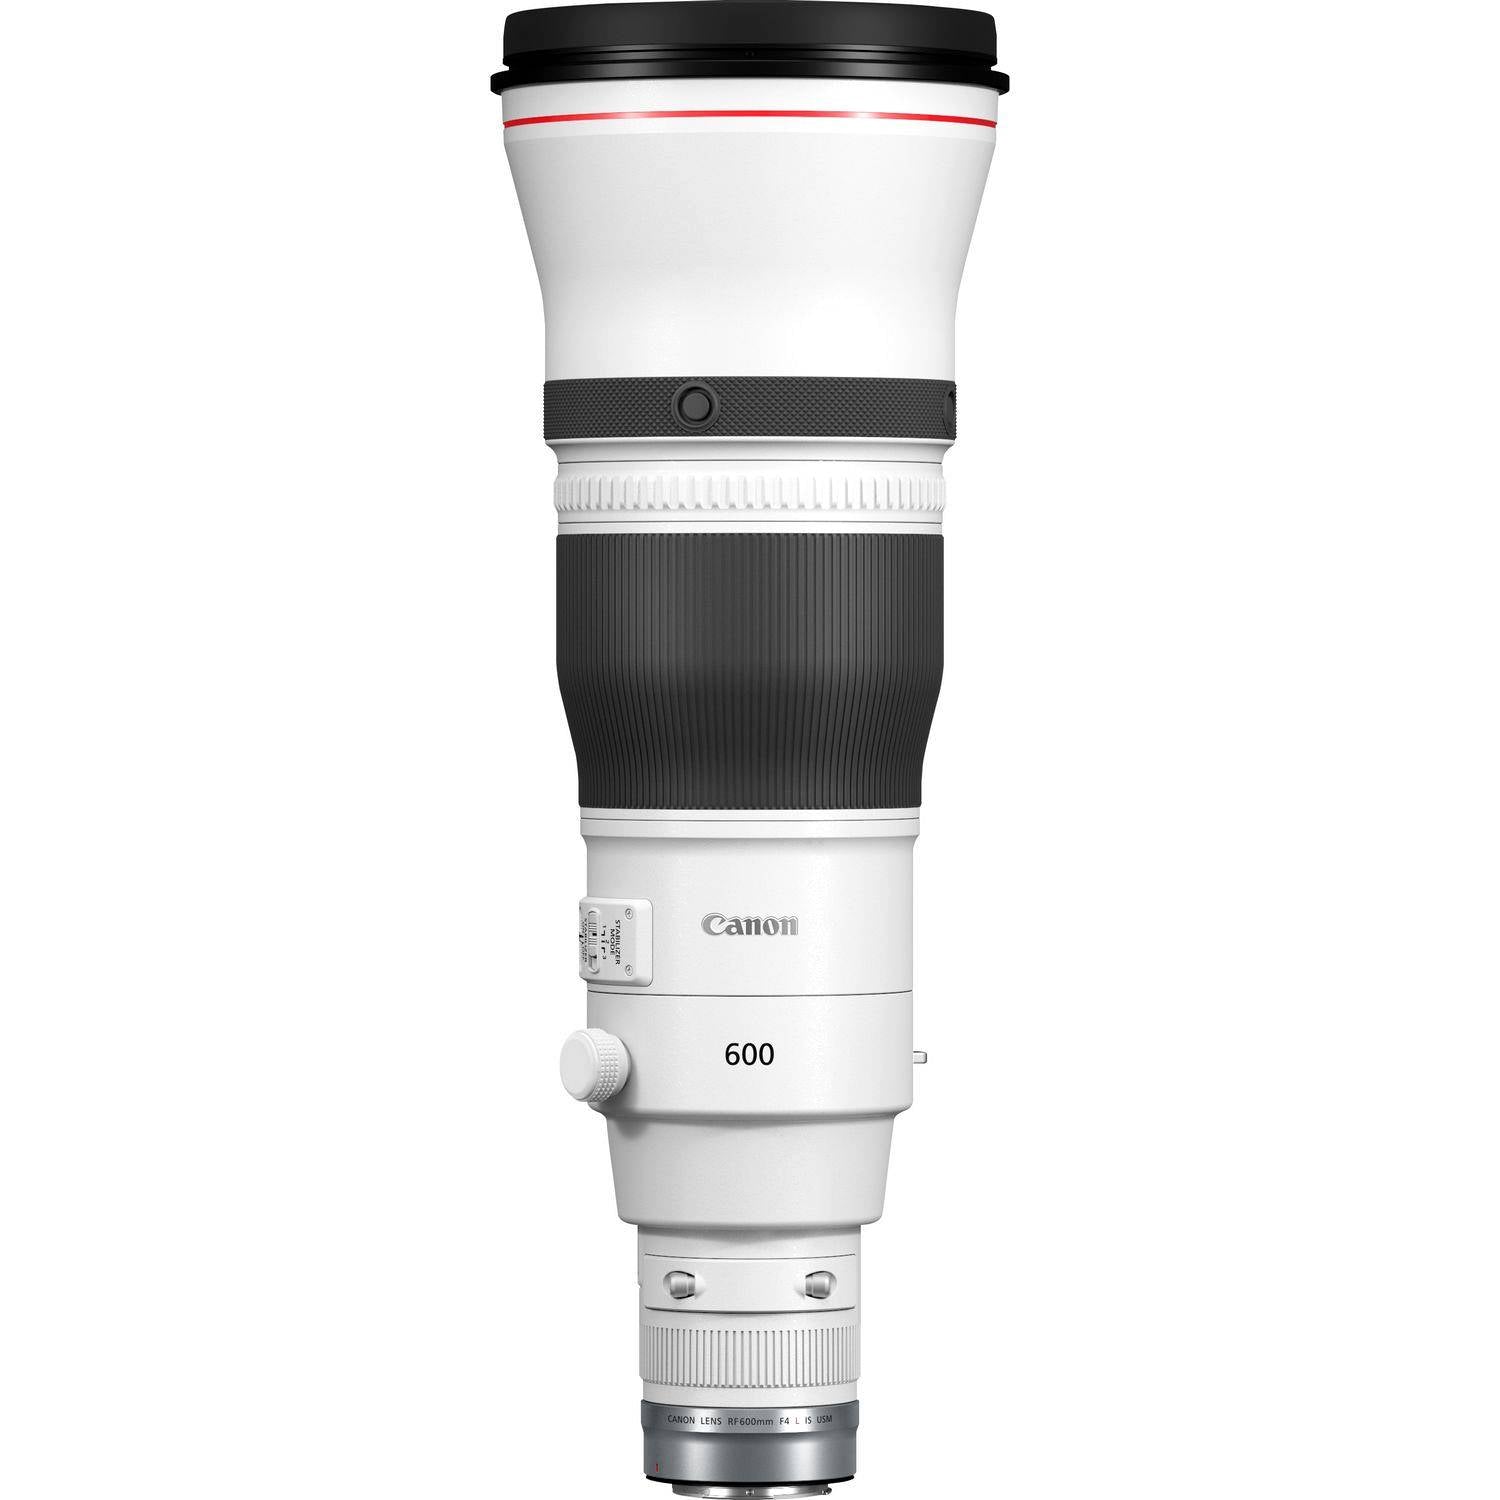 Product Image of Canon RF 600mm F4L IS USM Super Telephoto Lens